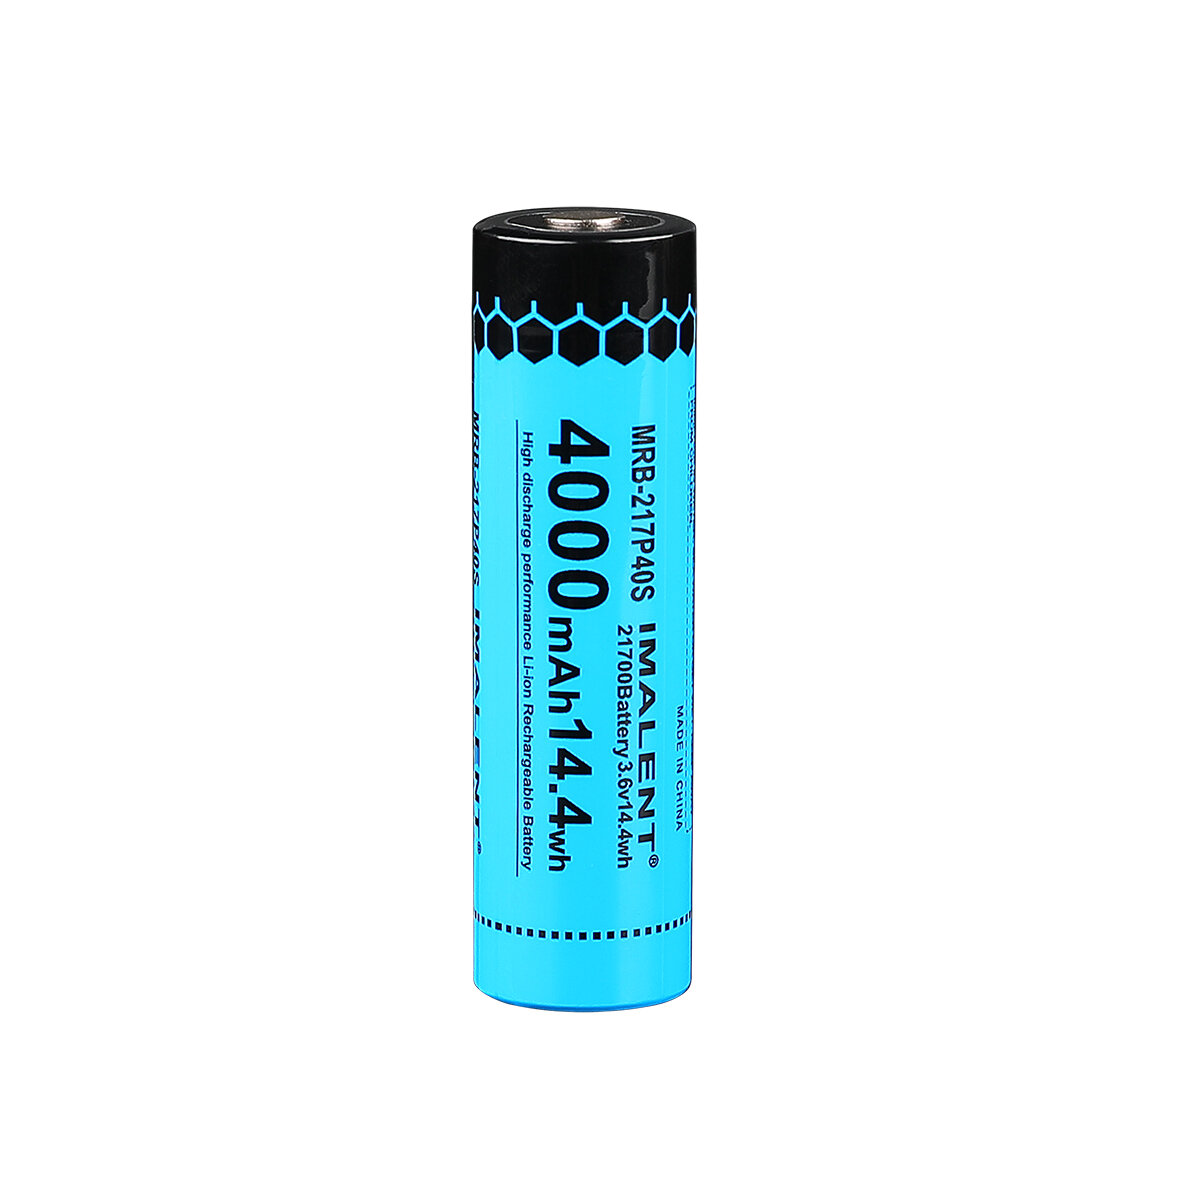 IMALENT MRB-217P40S 4000mAh High-Capacity 21700 Battery Type-C Rechargeable Battery For LED Flashlig